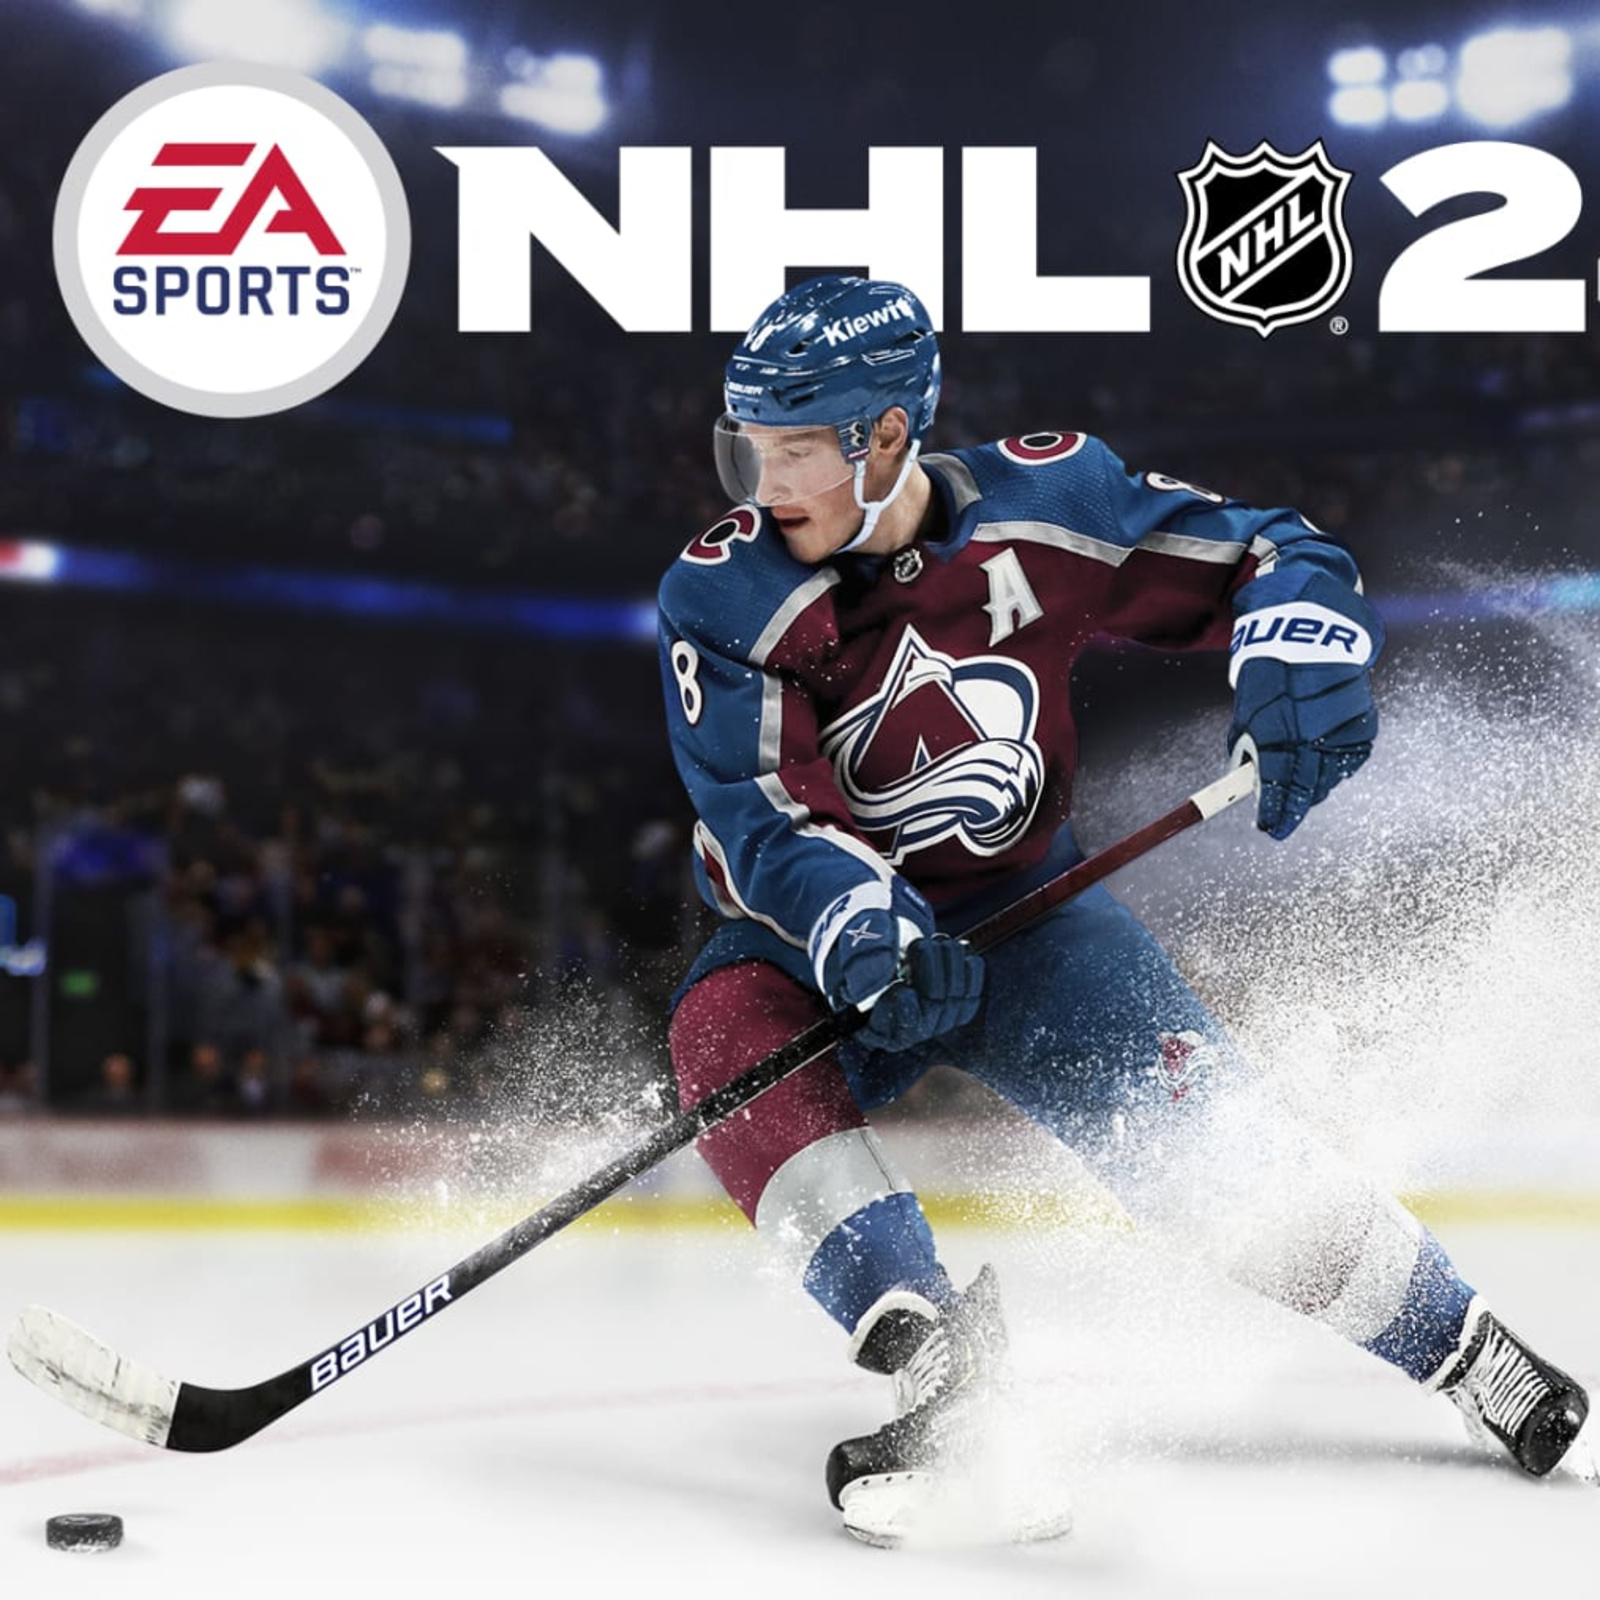 UPDATED* NHL 23 Game Modes: HUT, Be A Pro, Franchise Mode & World of Chel  features